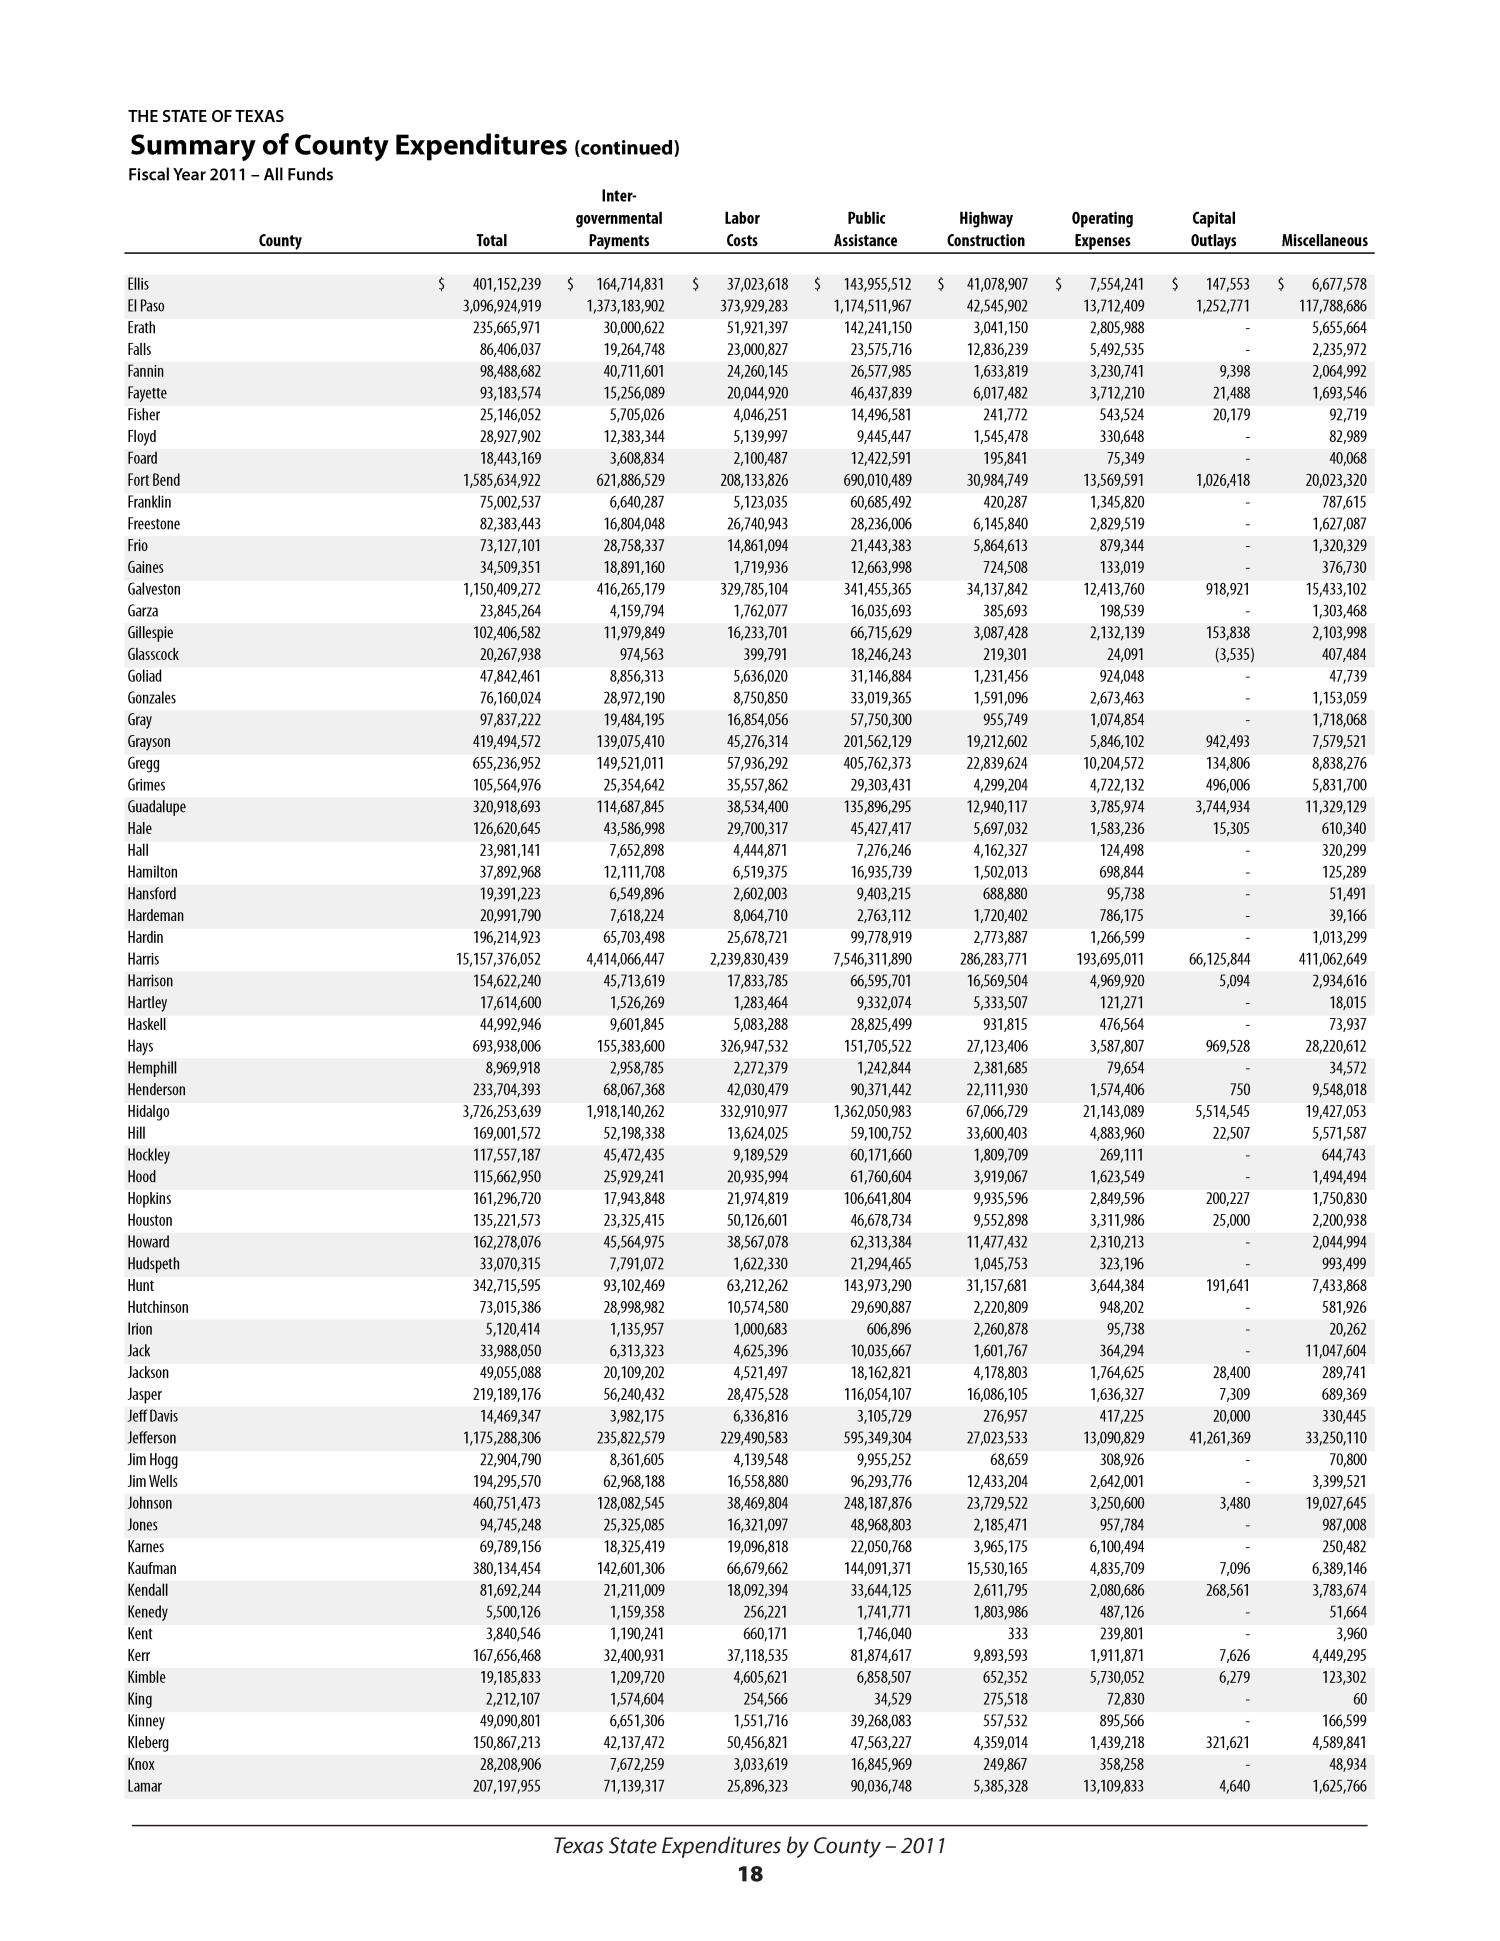 Texas State Expenditures by County: 2011
                                                
                                                    18
                                                